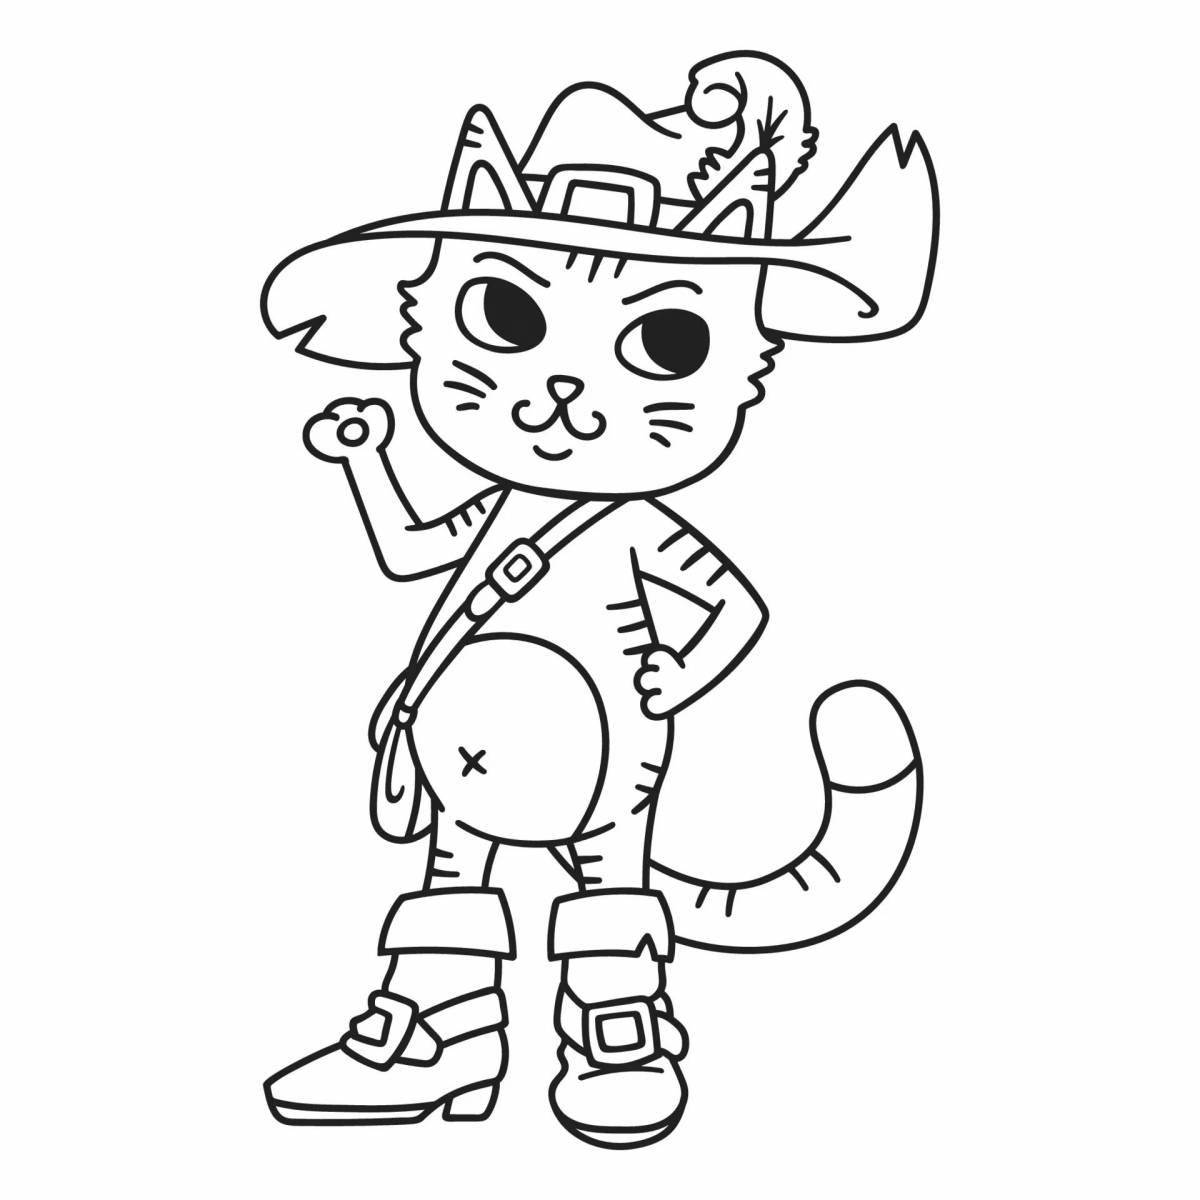 Glowing cat in a hat with boots